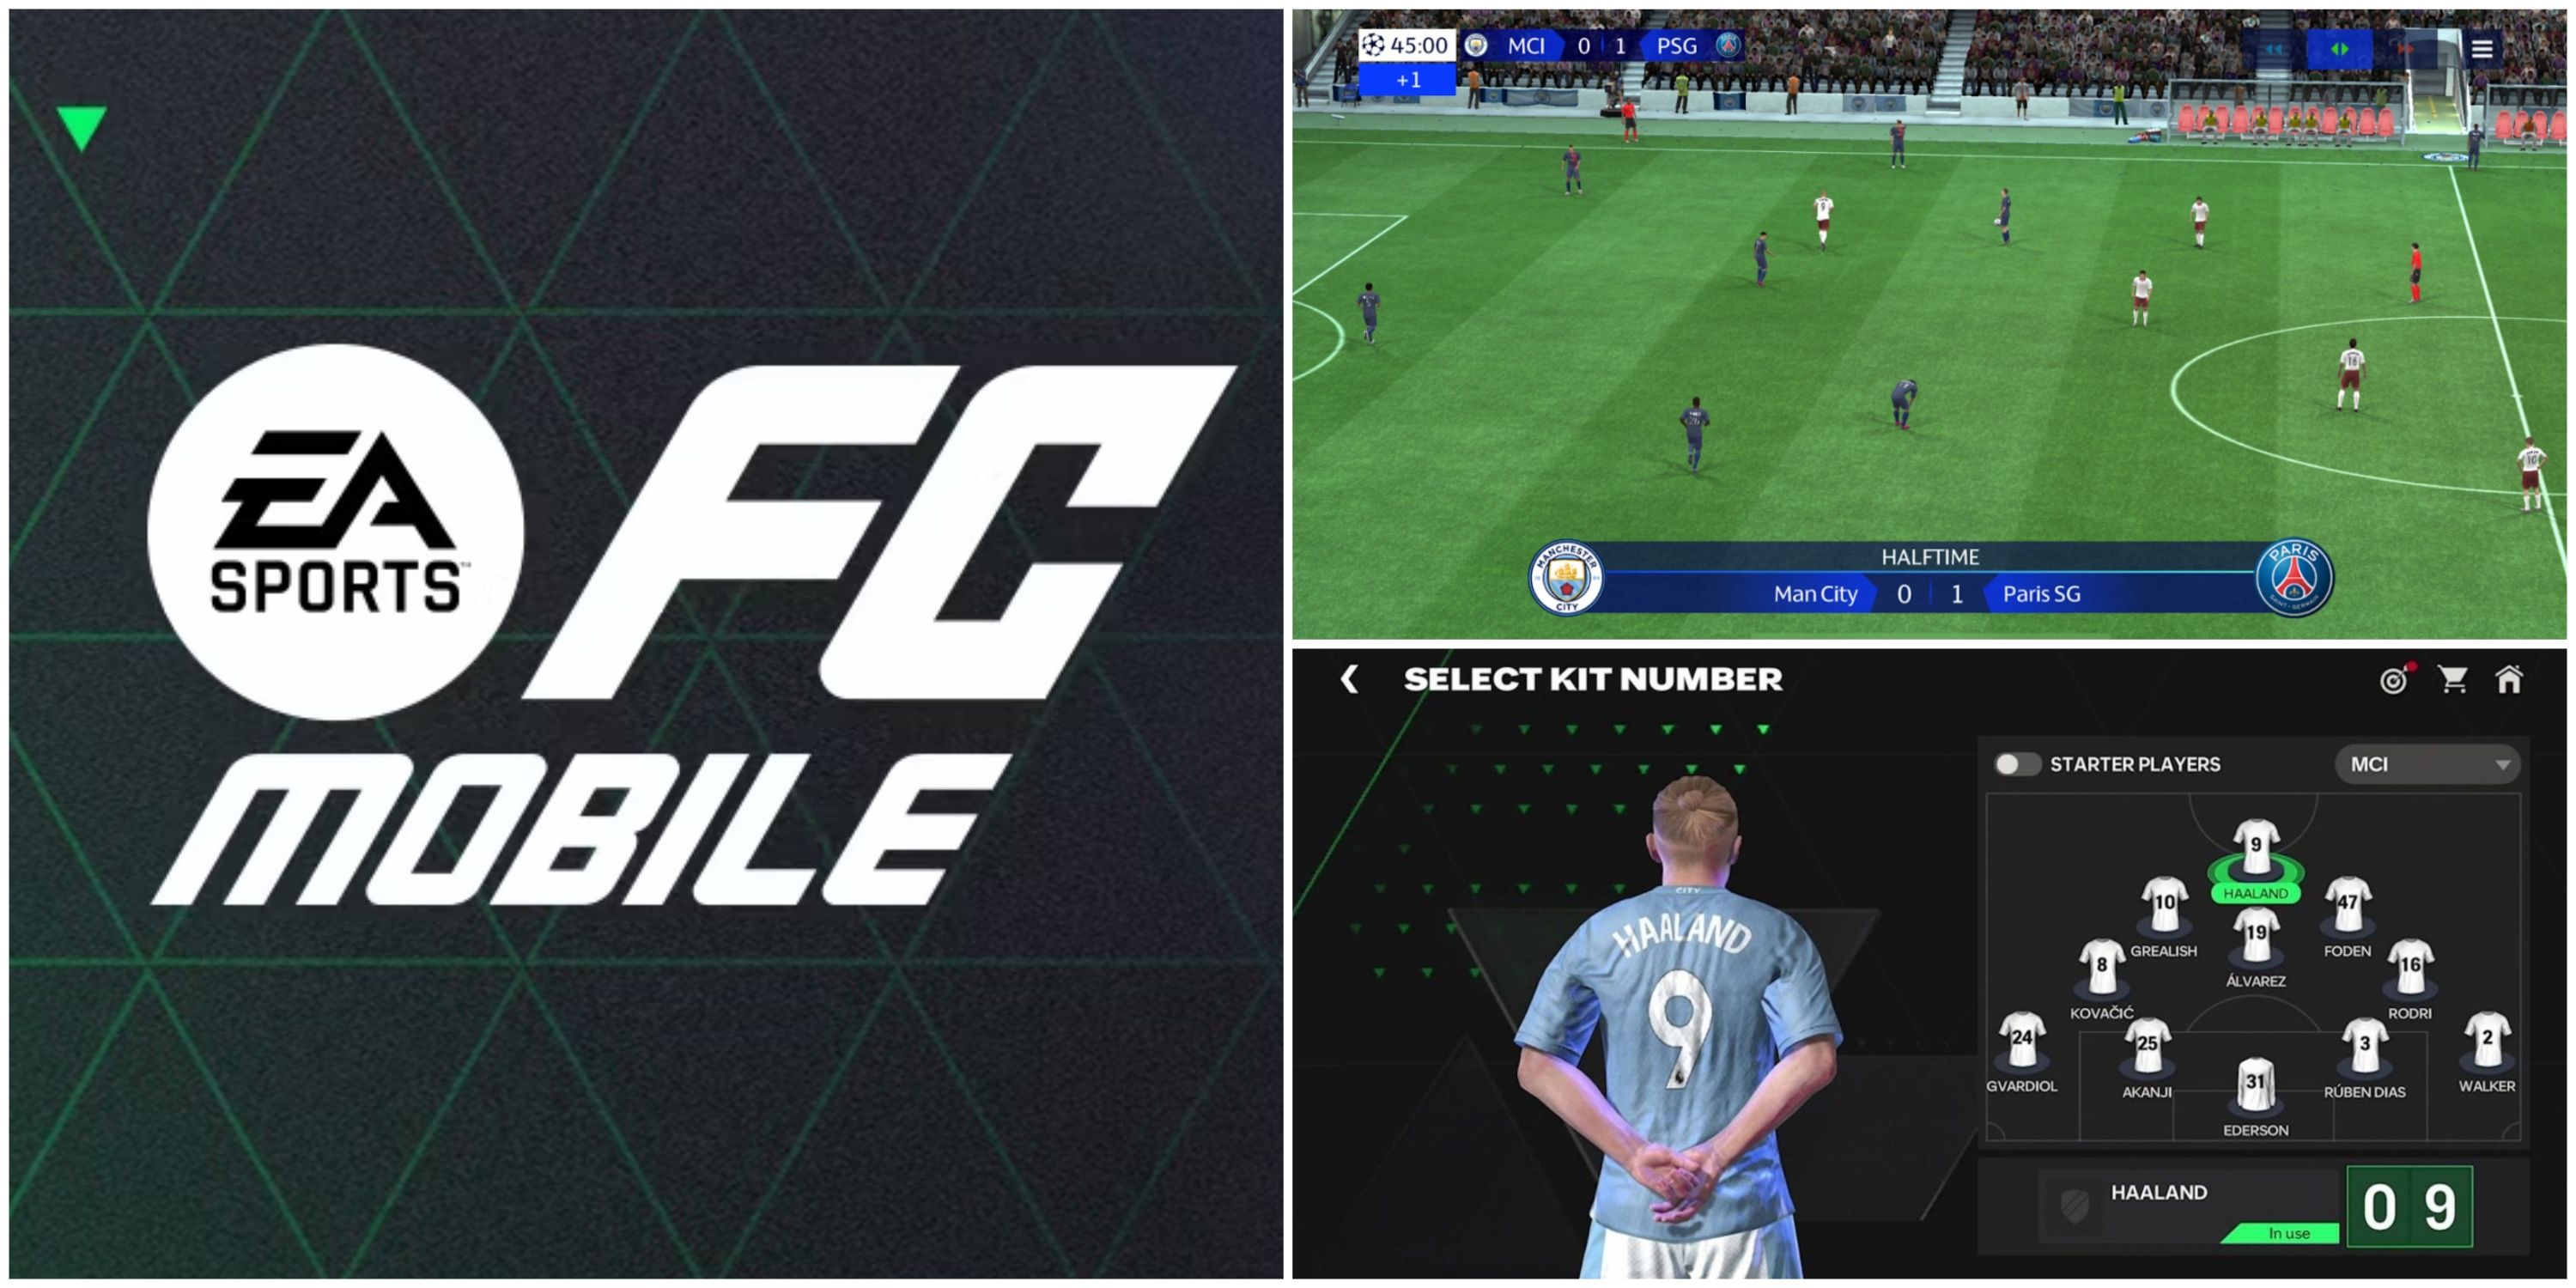 EA SPORTS FC™ MOBILE Gameplay Android / iOS 